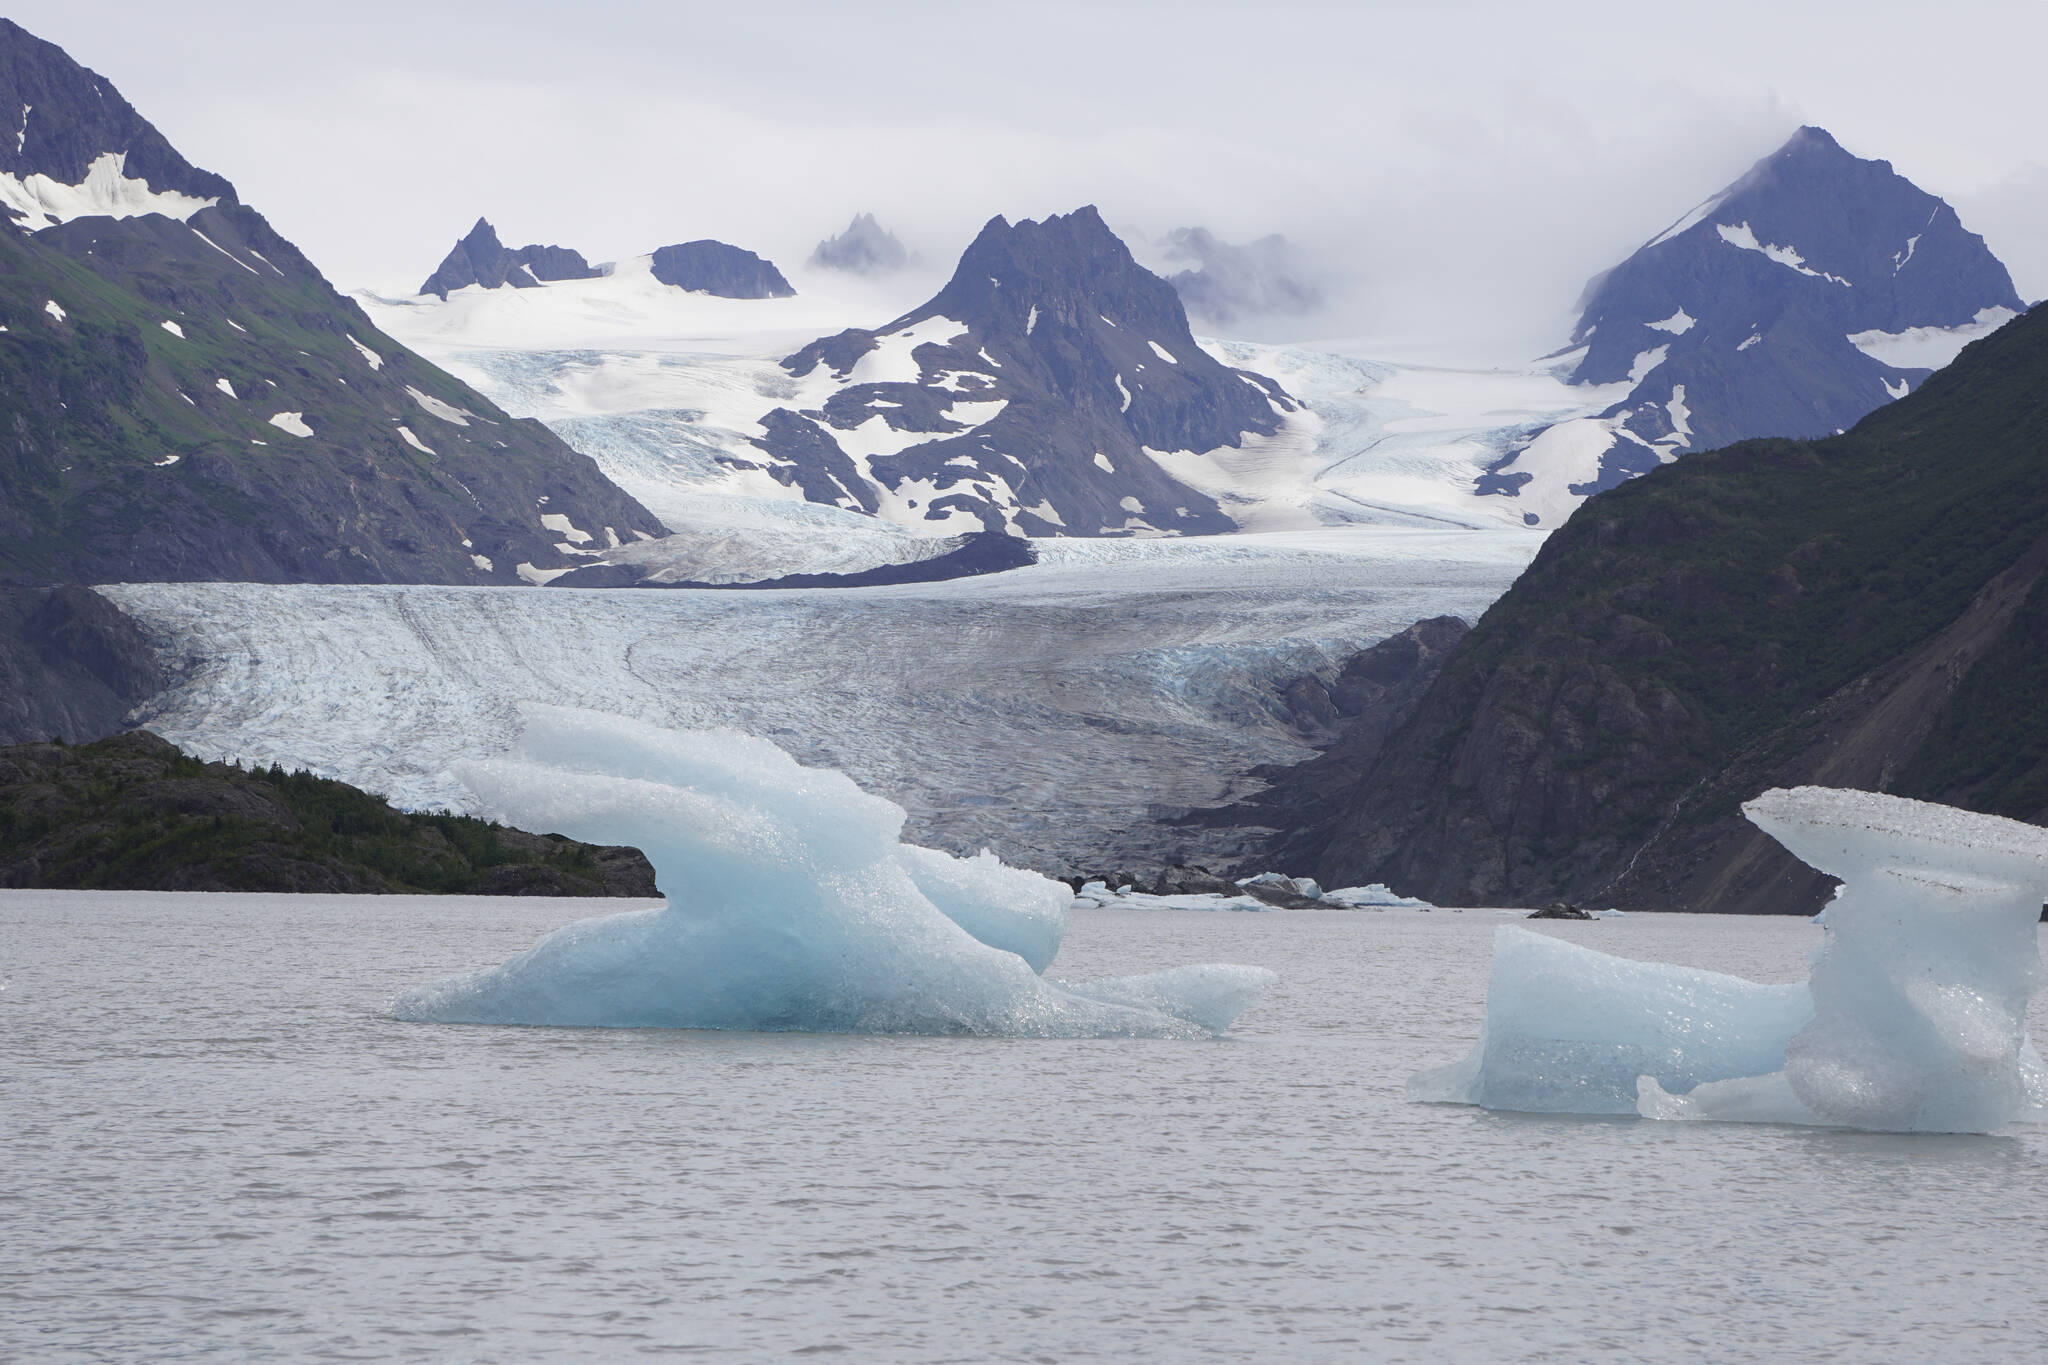 Icebergs have been pushed close to shore at Grewingk Glacier Lake on Monday, July 25, 2022, in Kachemak Bay State Park near Halibut Cove, Alaska. (Photo by Michael Armstrong/Homer News)